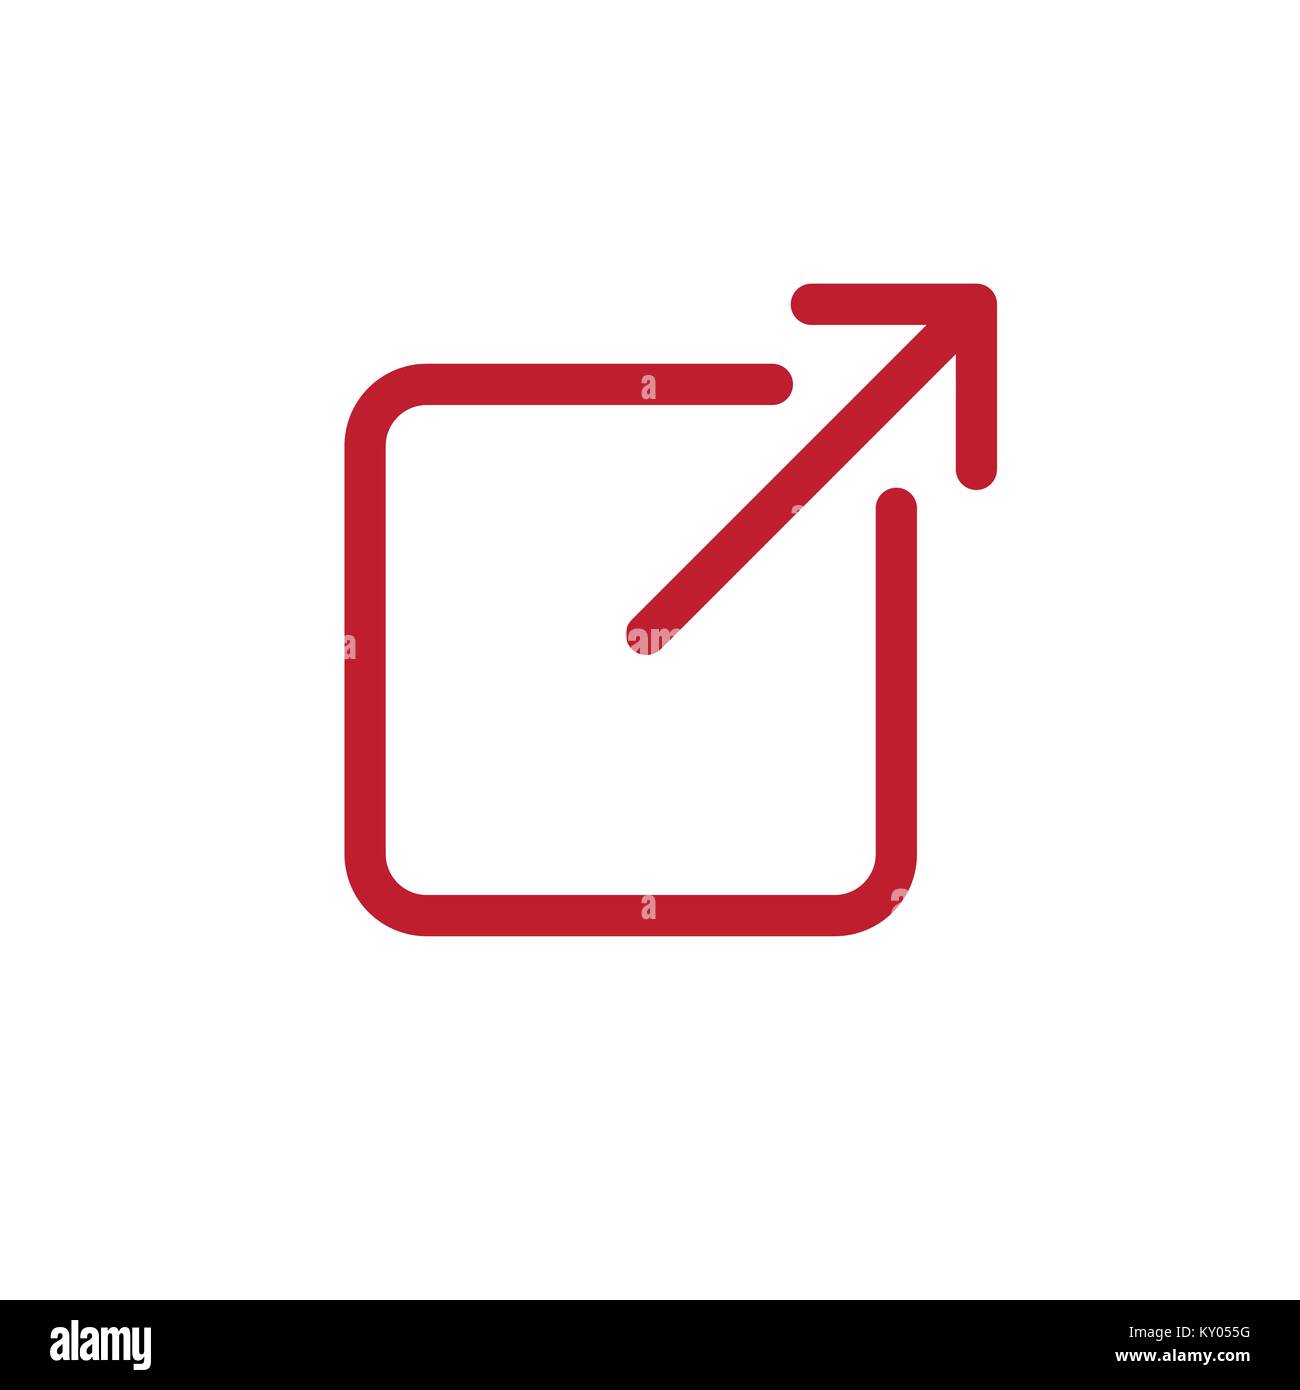 External Link Icon with Arrow and Box for leaving site Stock Vector